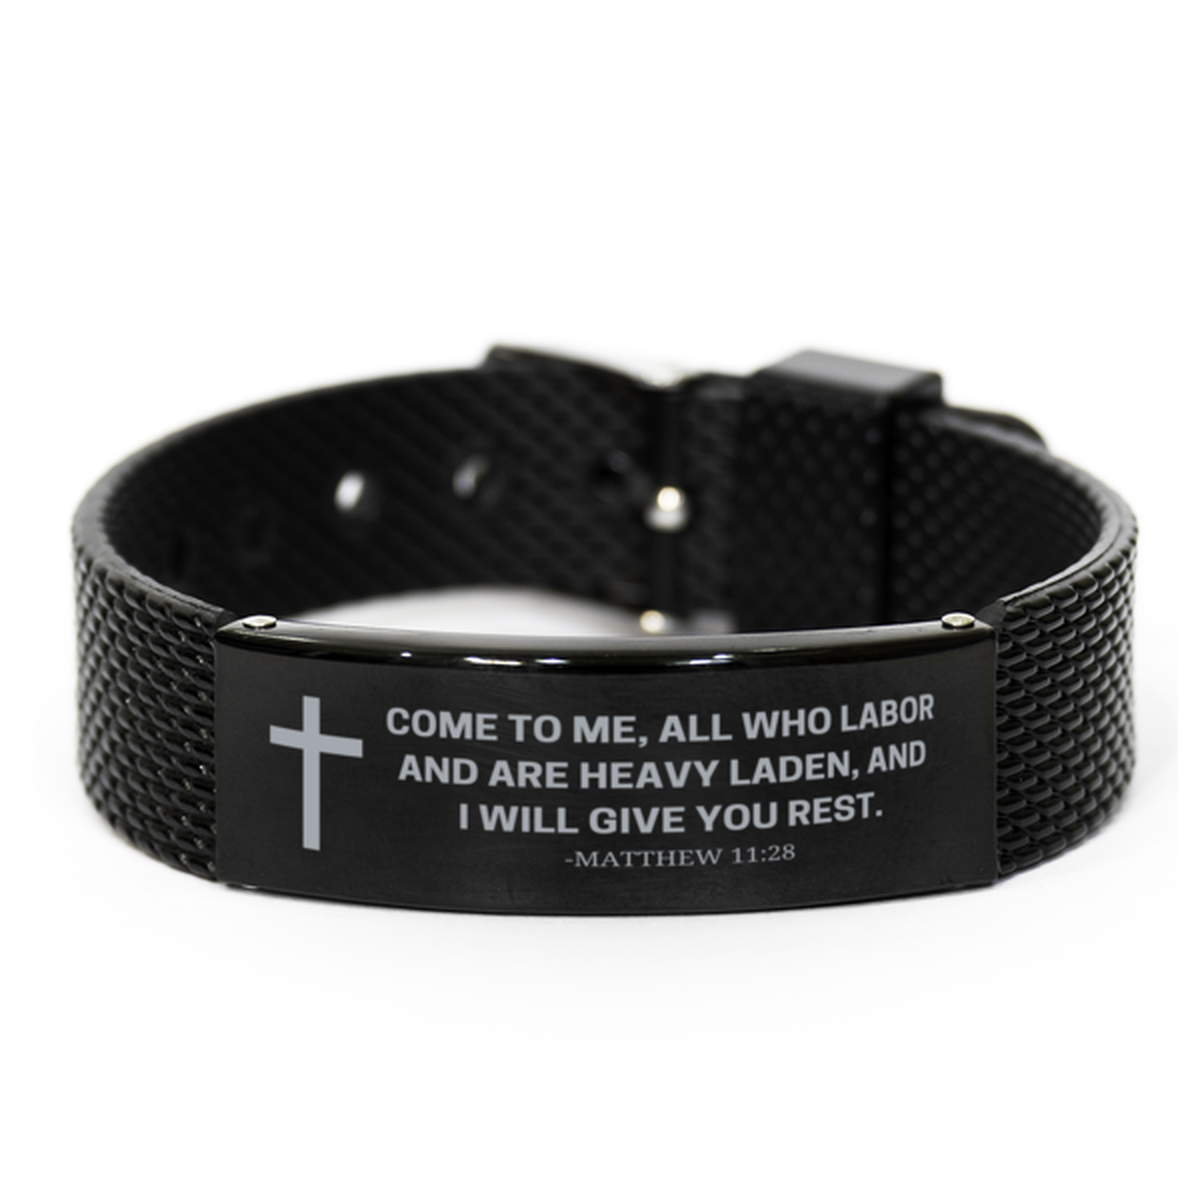 Baptism Gifts For Teenage Boys Girls, Christian Bible Verse Black Shark Mesh Bracelet, Come to me, all who labor, Catholic Confirmation Gifts for Son, Godson, Grandson, Nephew